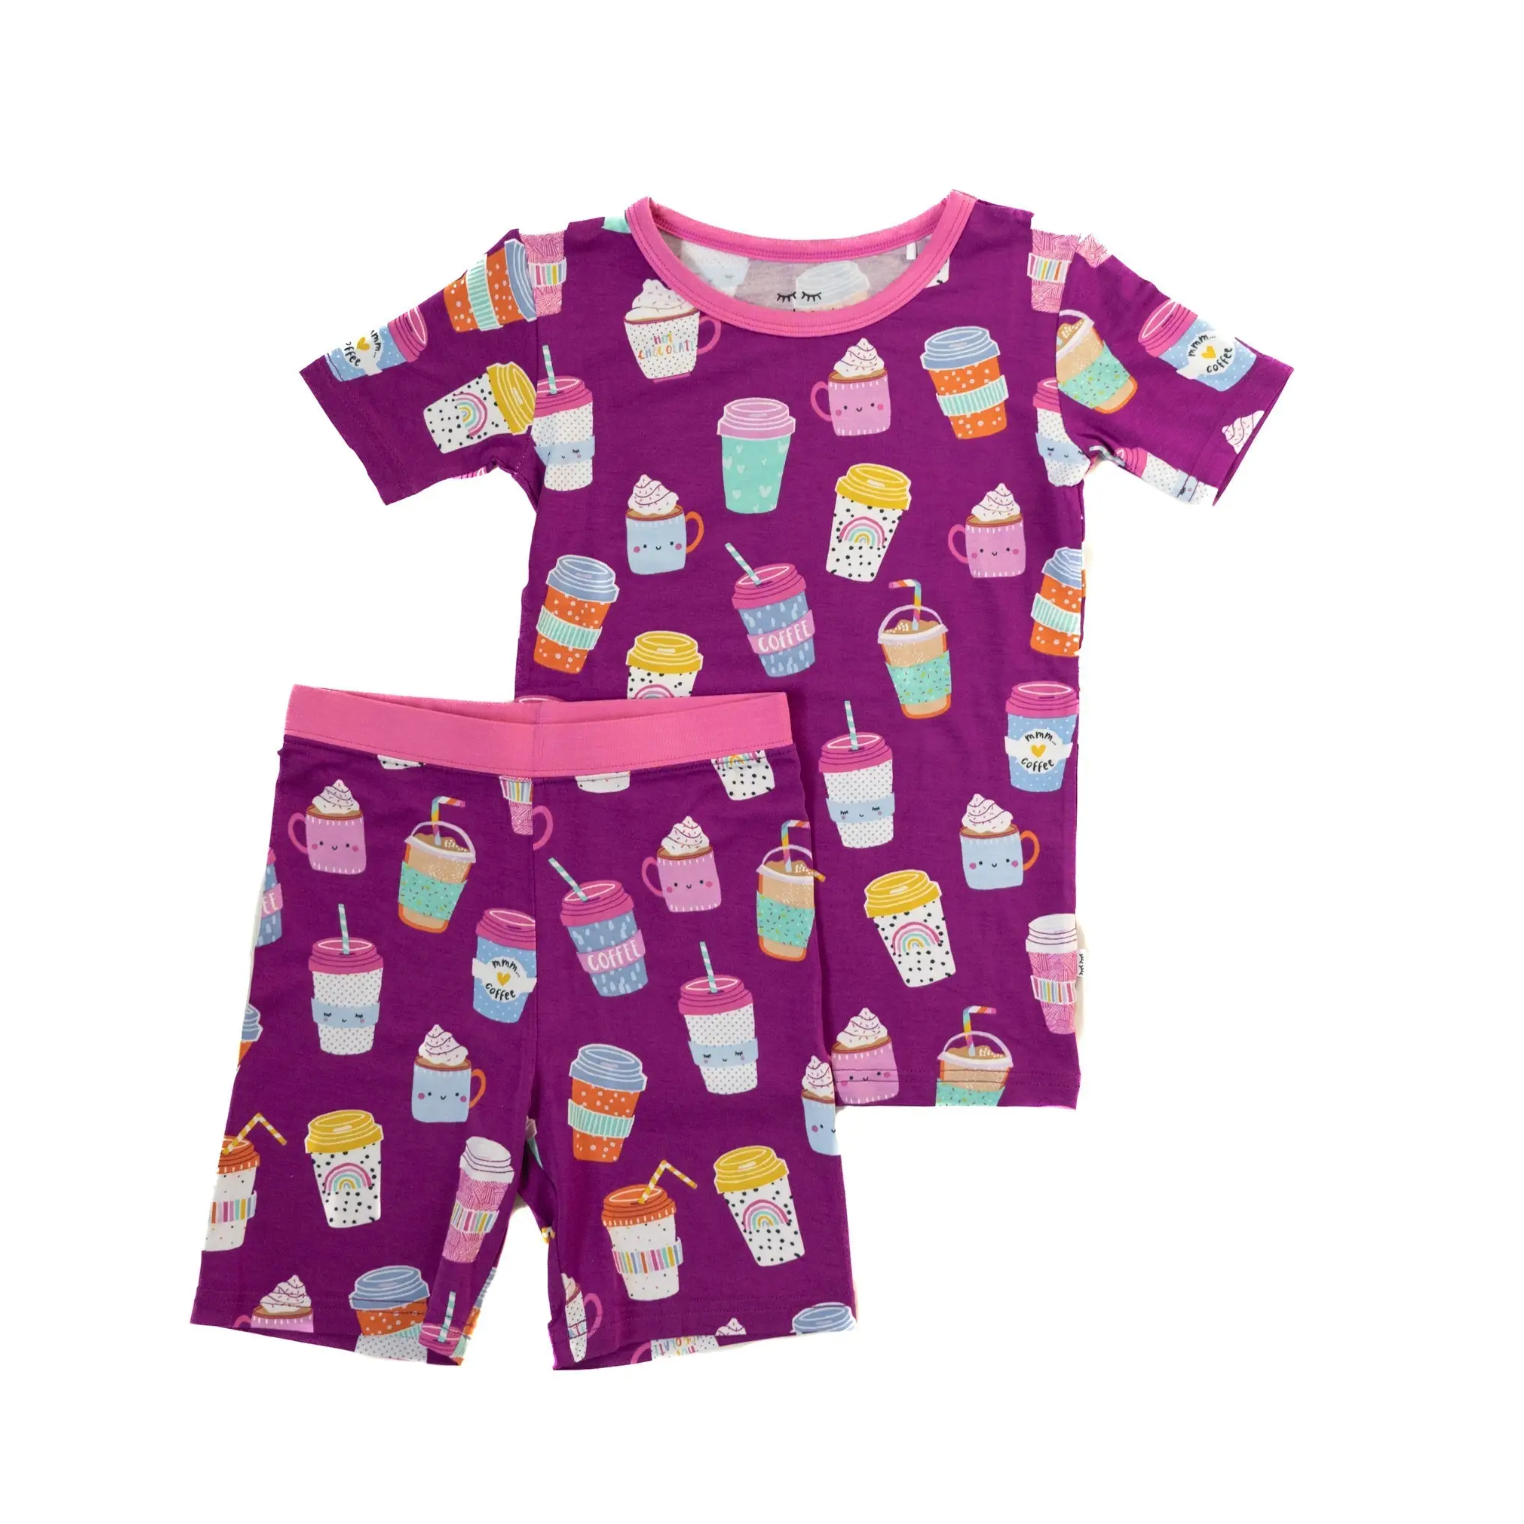 "i love you a latte" s/s and shorts two-piece bamboo viscose pajama set in purple